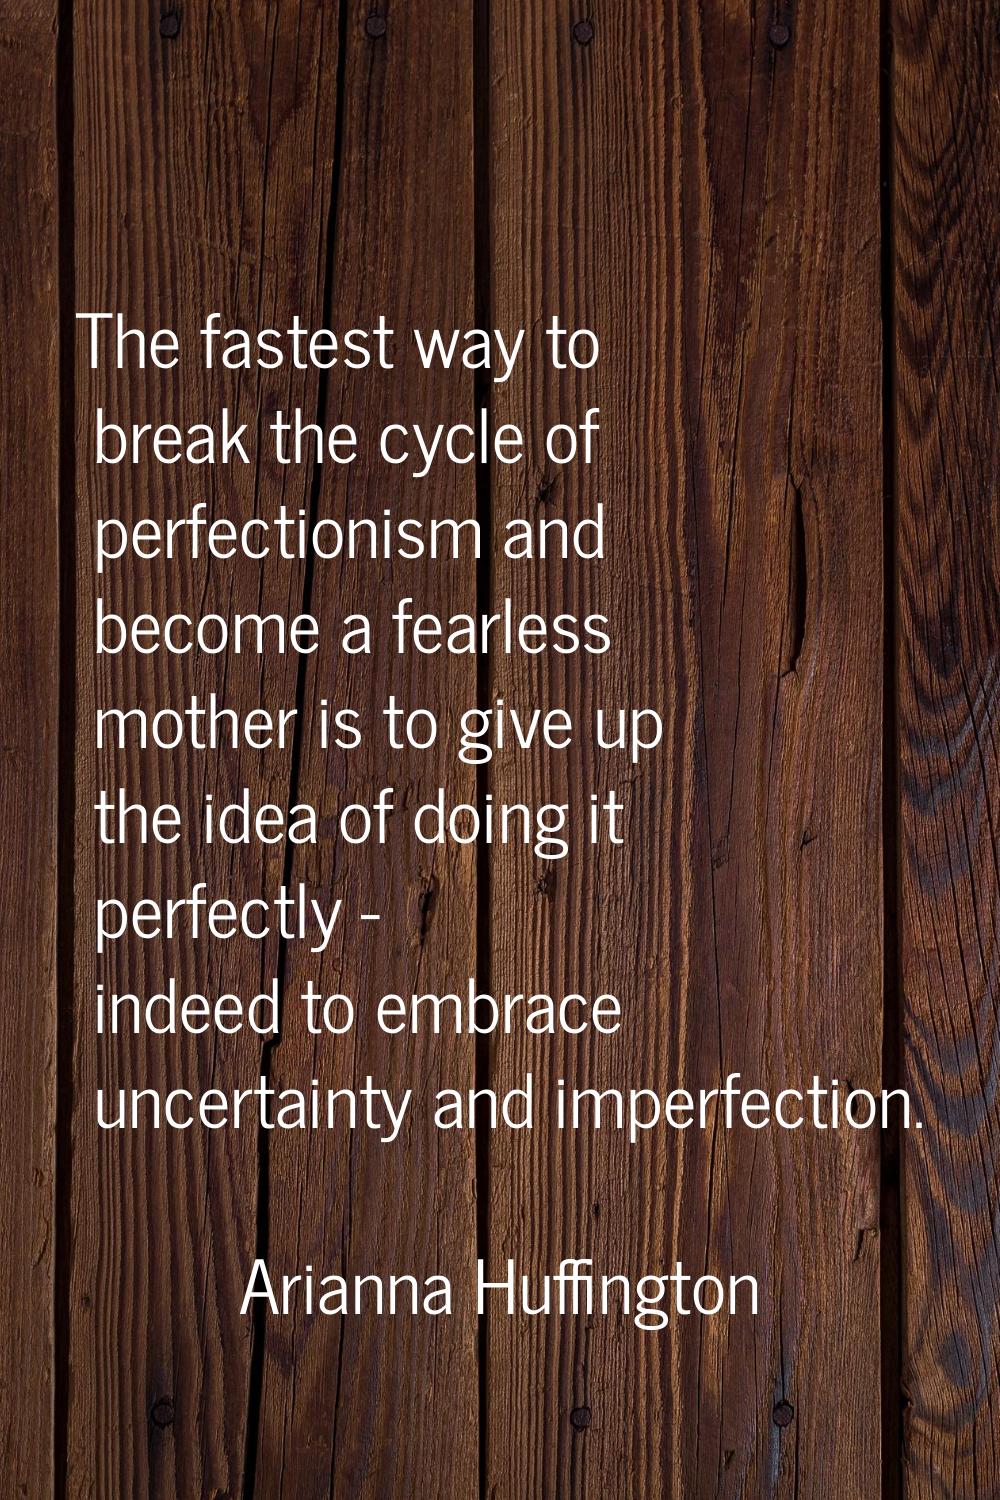 The fastest way to break the cycle of perfectionism and become a fearless mother is to give up the 